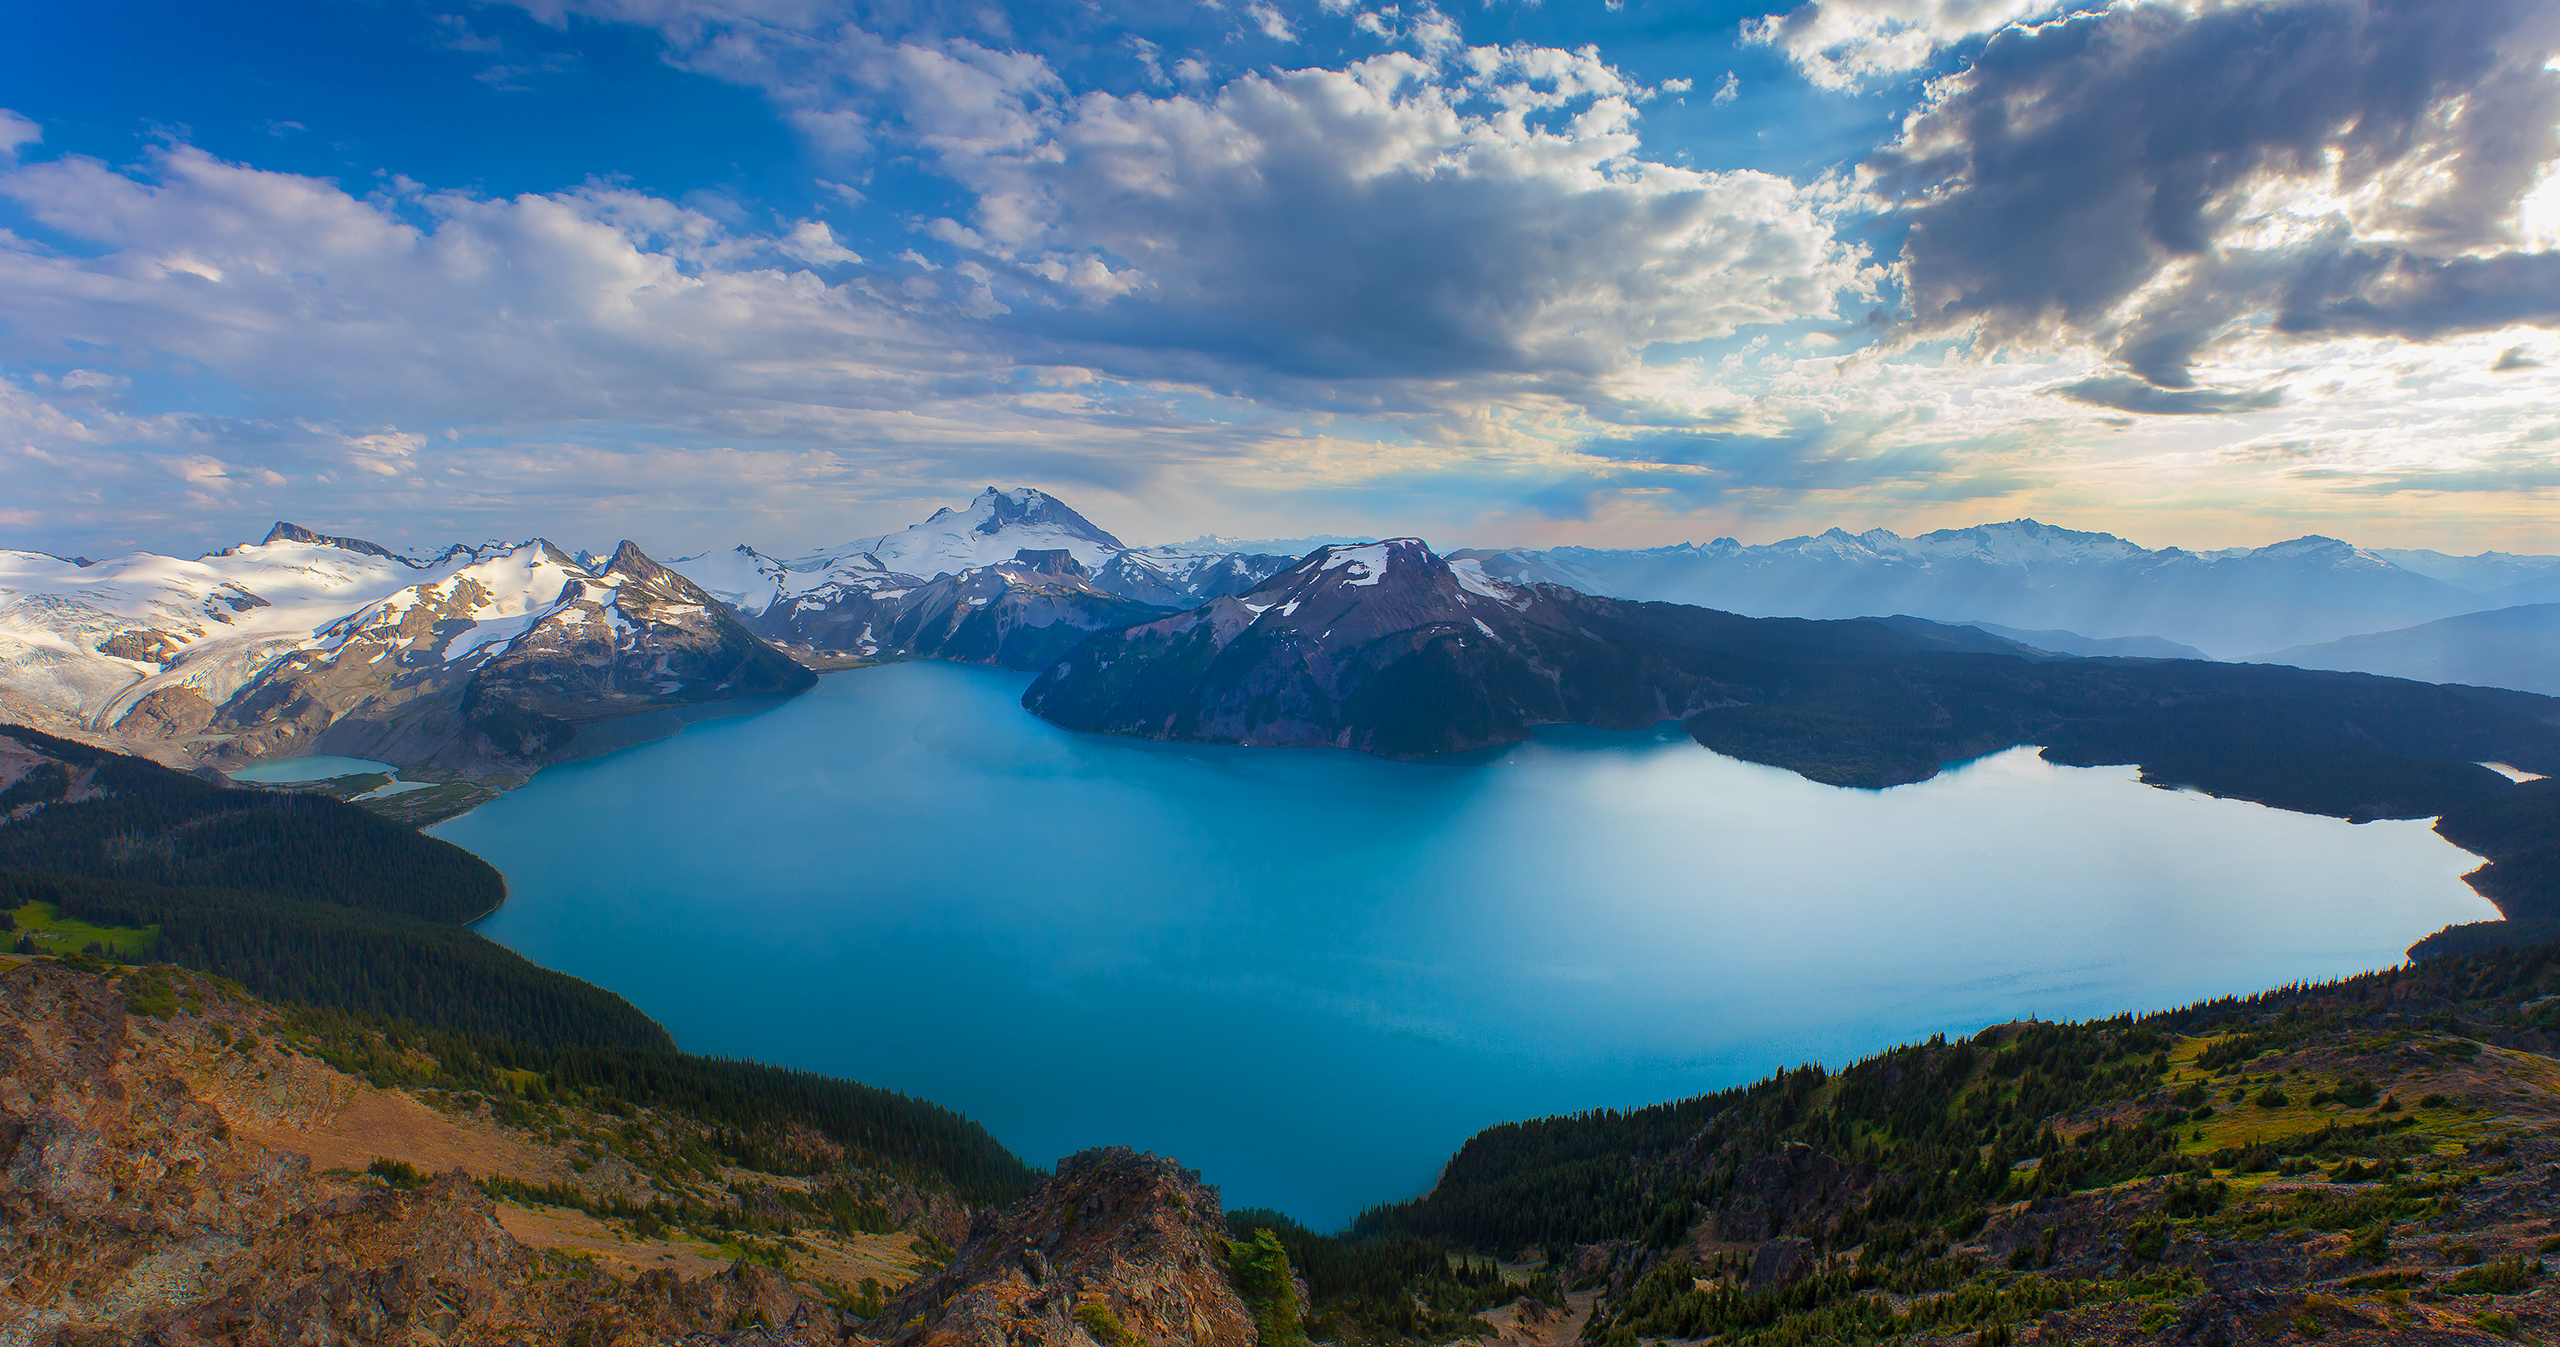 Full HD british columbia, mountains, view from above, nature, lake, canada